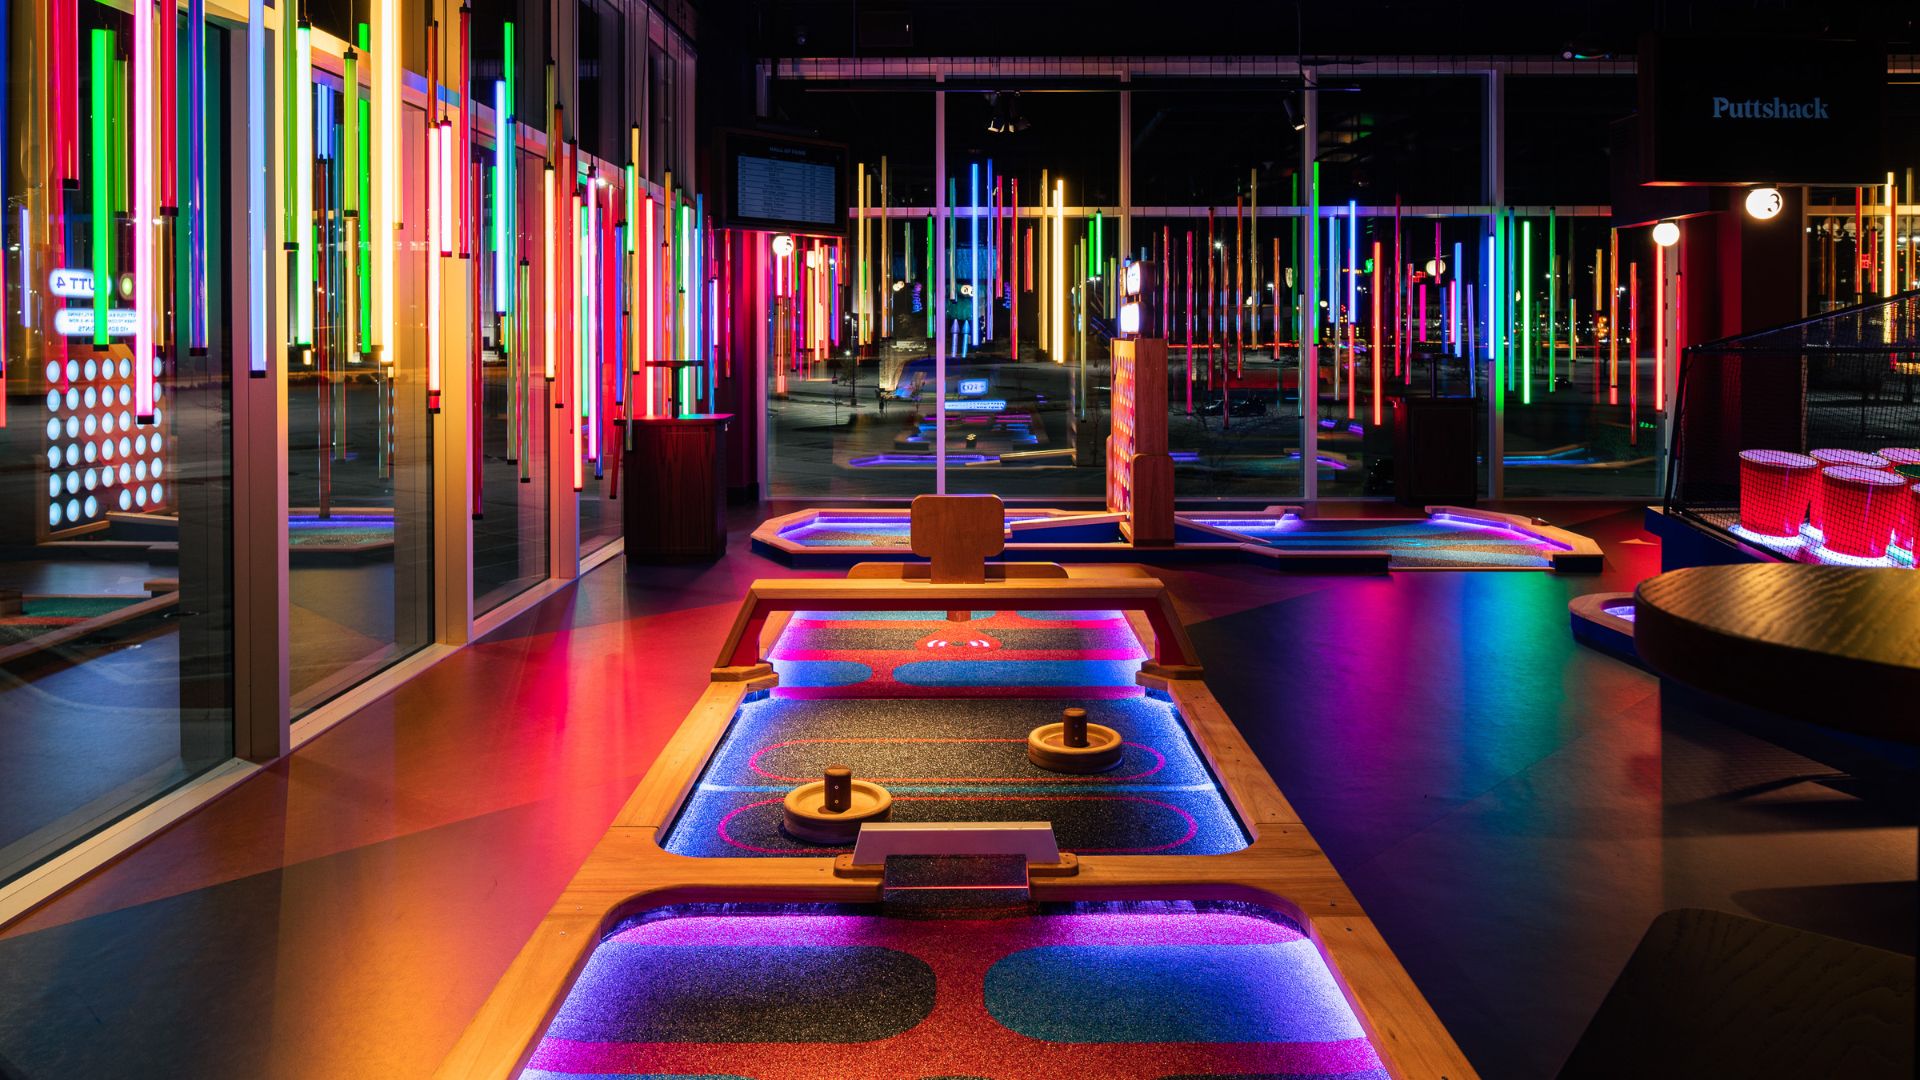 Puttshack St. Louis at City Foundry is a tech-infused mini golf course with colorful courses and good vibes.